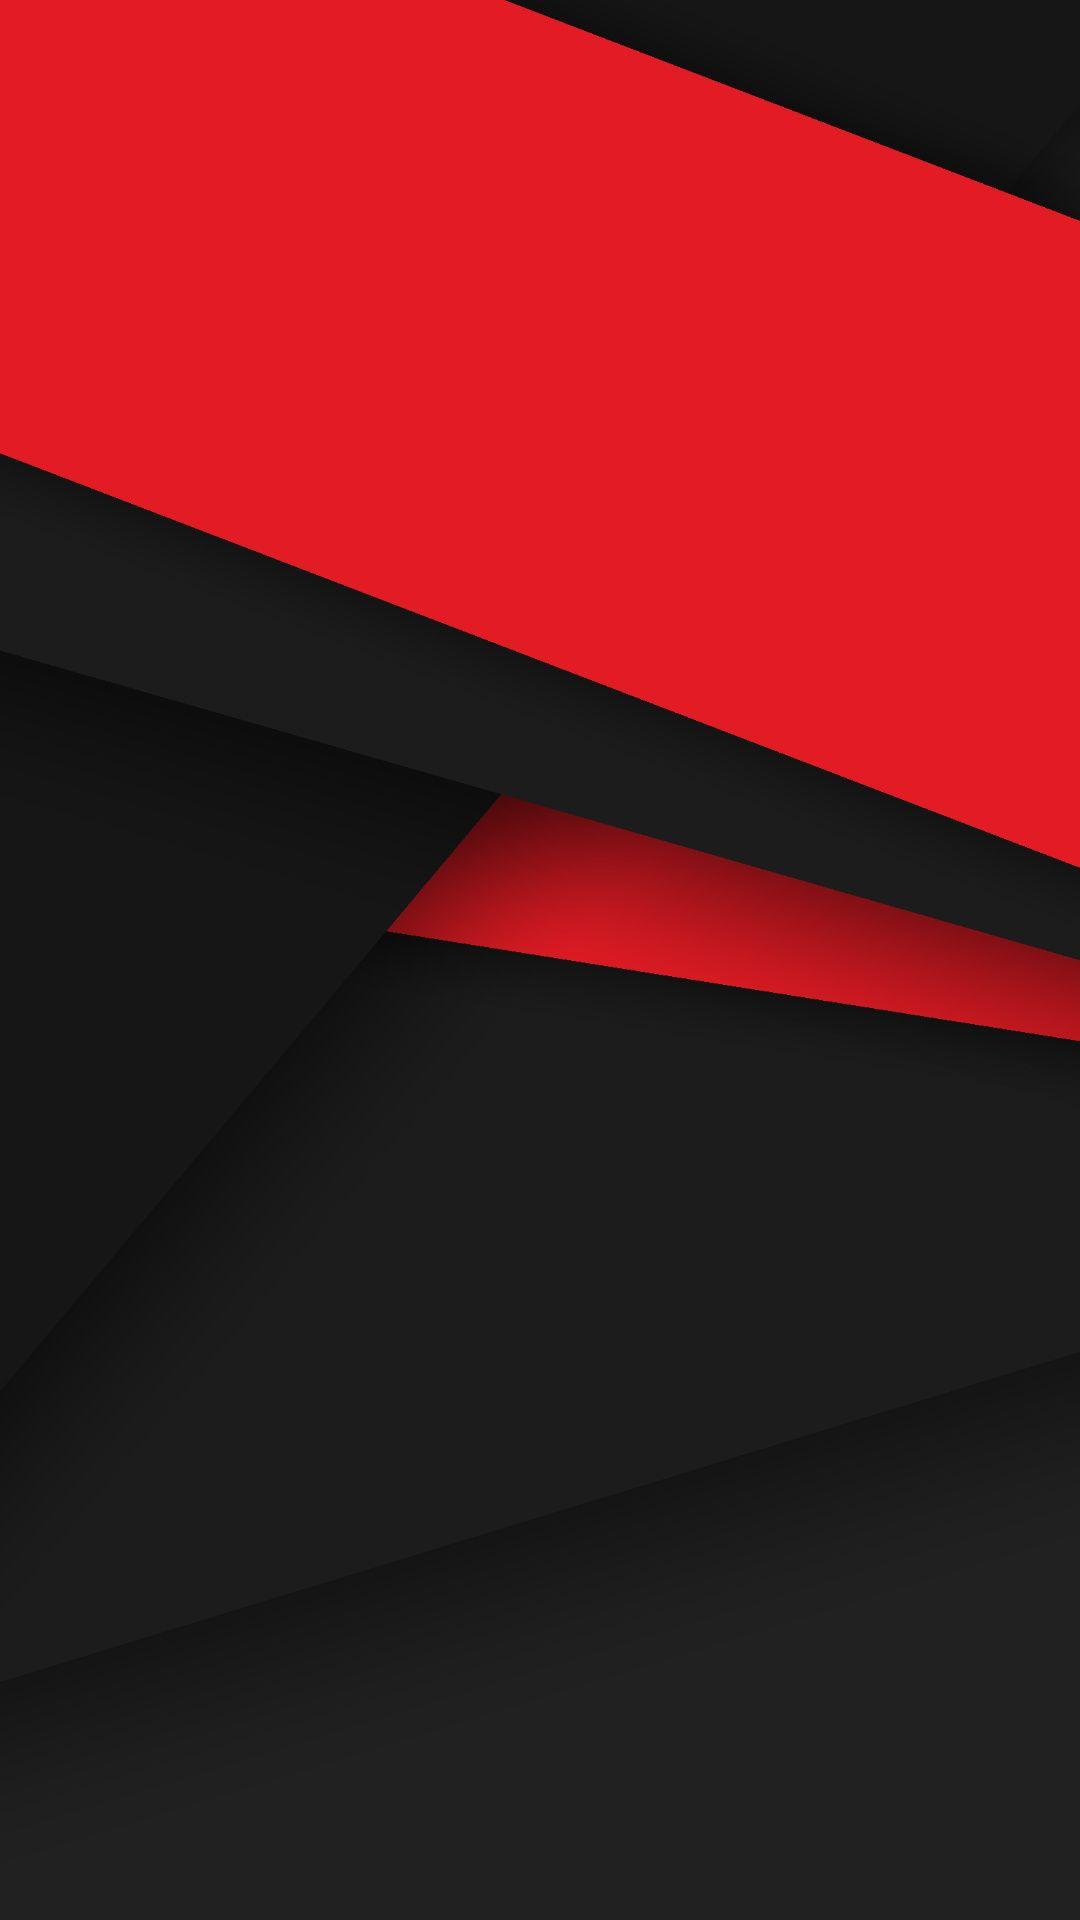 Material Design Red Black HD Wallpaper for Android Mobile